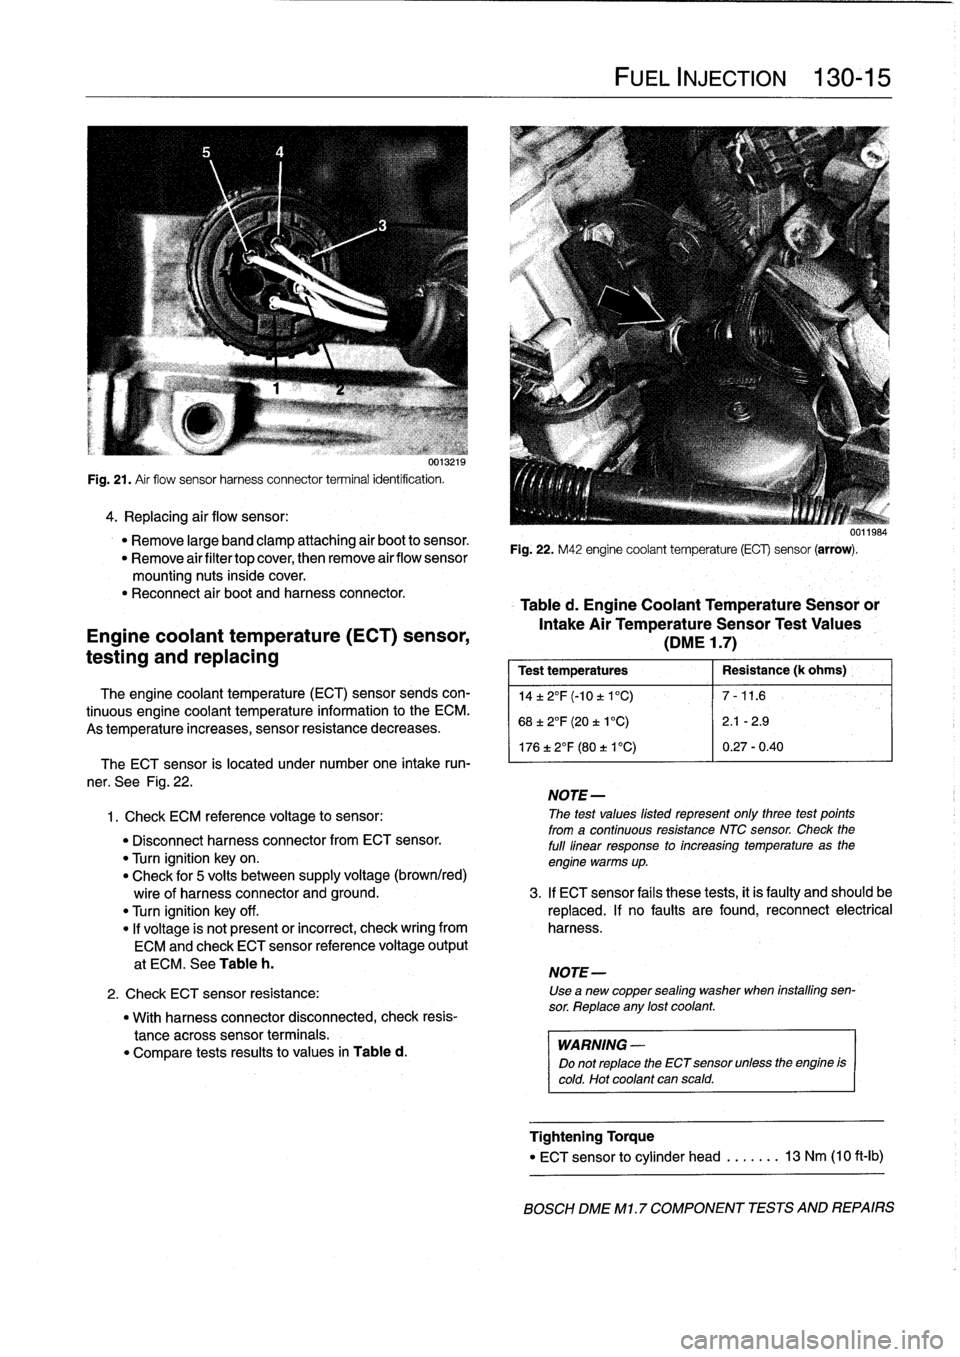 BMW 318i 1997 E36 Owners Guide u0
I
.[
Ia

Fig
.
21
.
Air
flow
sensor
harness
connector
terminal
identification
.

4
.
Replacing
air
flow
sensor
:

"
Remove
large
band
clamp
attaching
air
boot
to
sensor
.

"
Remove
airfiltertop
cov